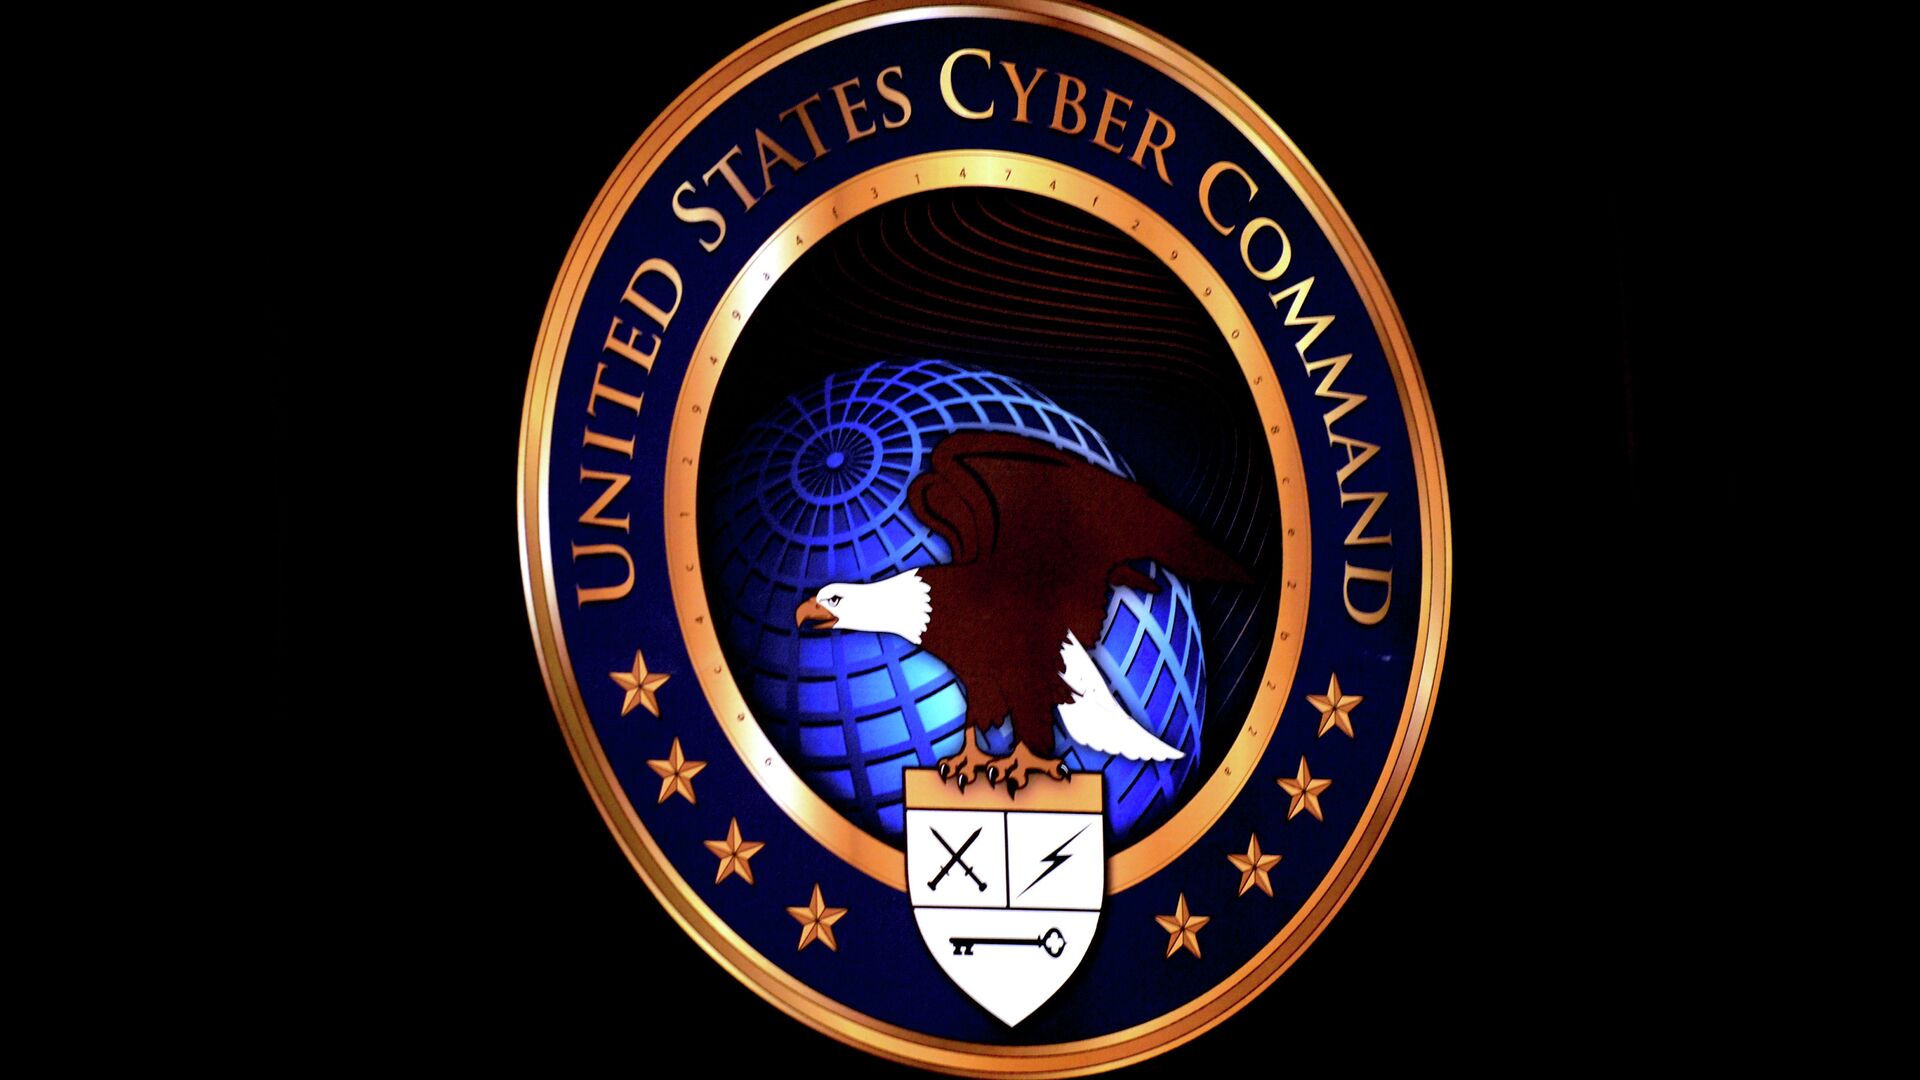 Established in June 2009, US Cyber Command organizes cyberattacks against adversaries and network defense operations - اسپوتنیک افغانستان  , 1920, 05.09.2022